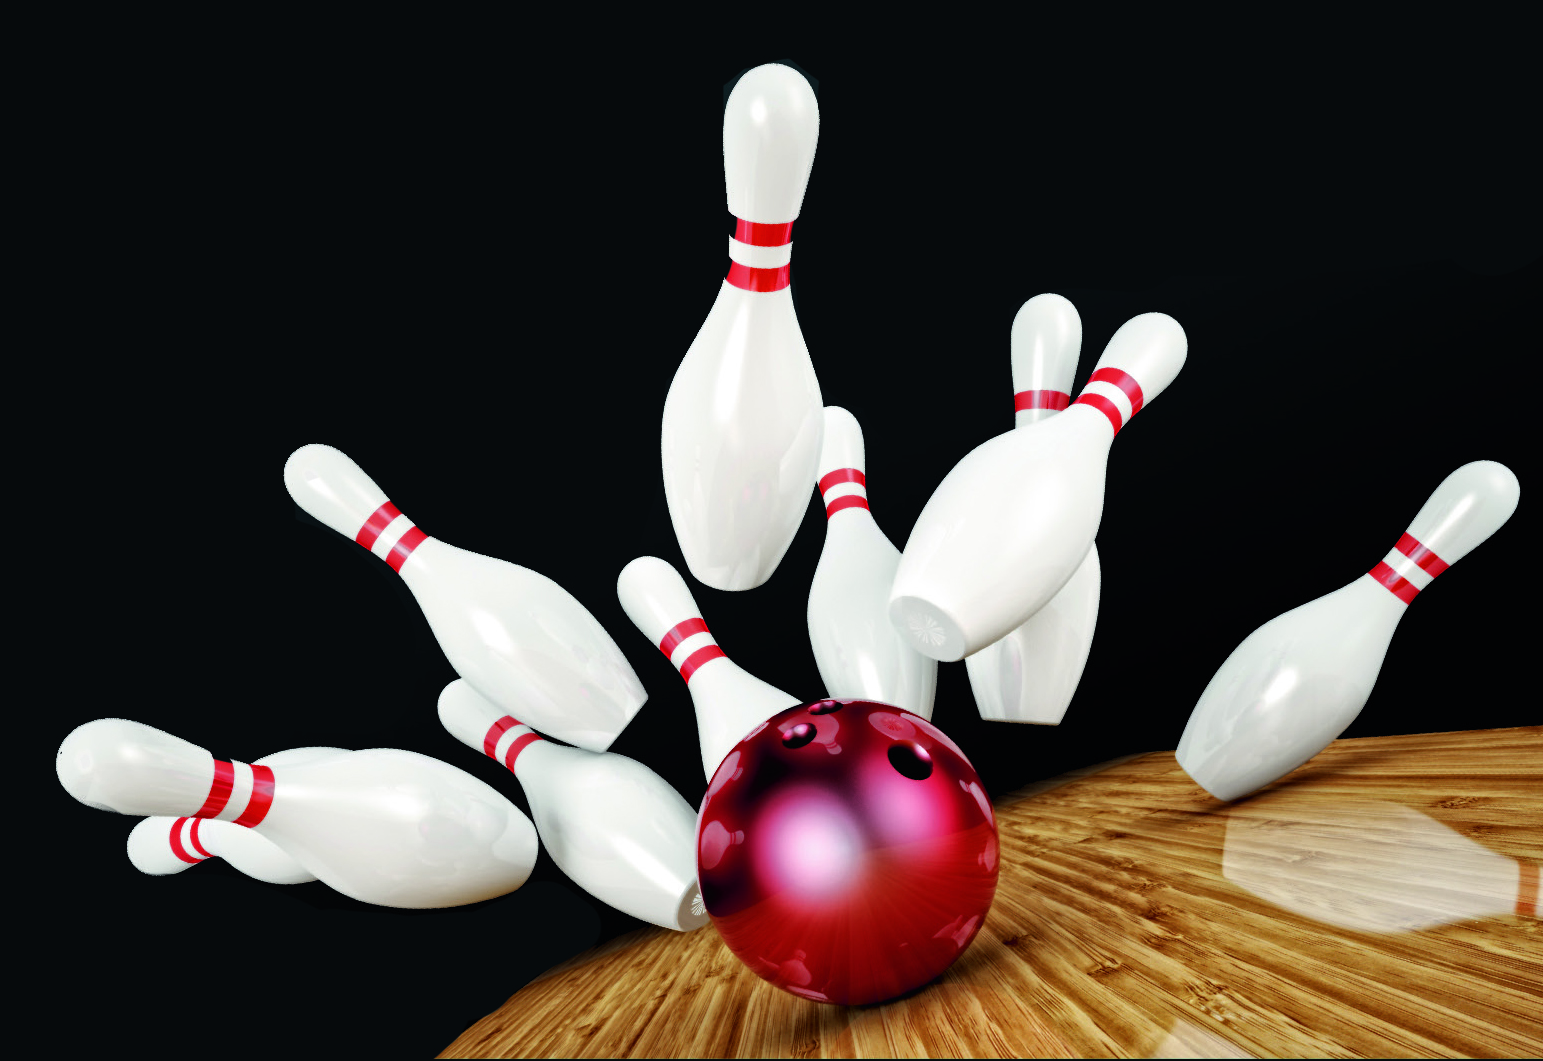 90% Of People Will Fail This Tricky General Knowledge Test. Will You? 10 pin bowling